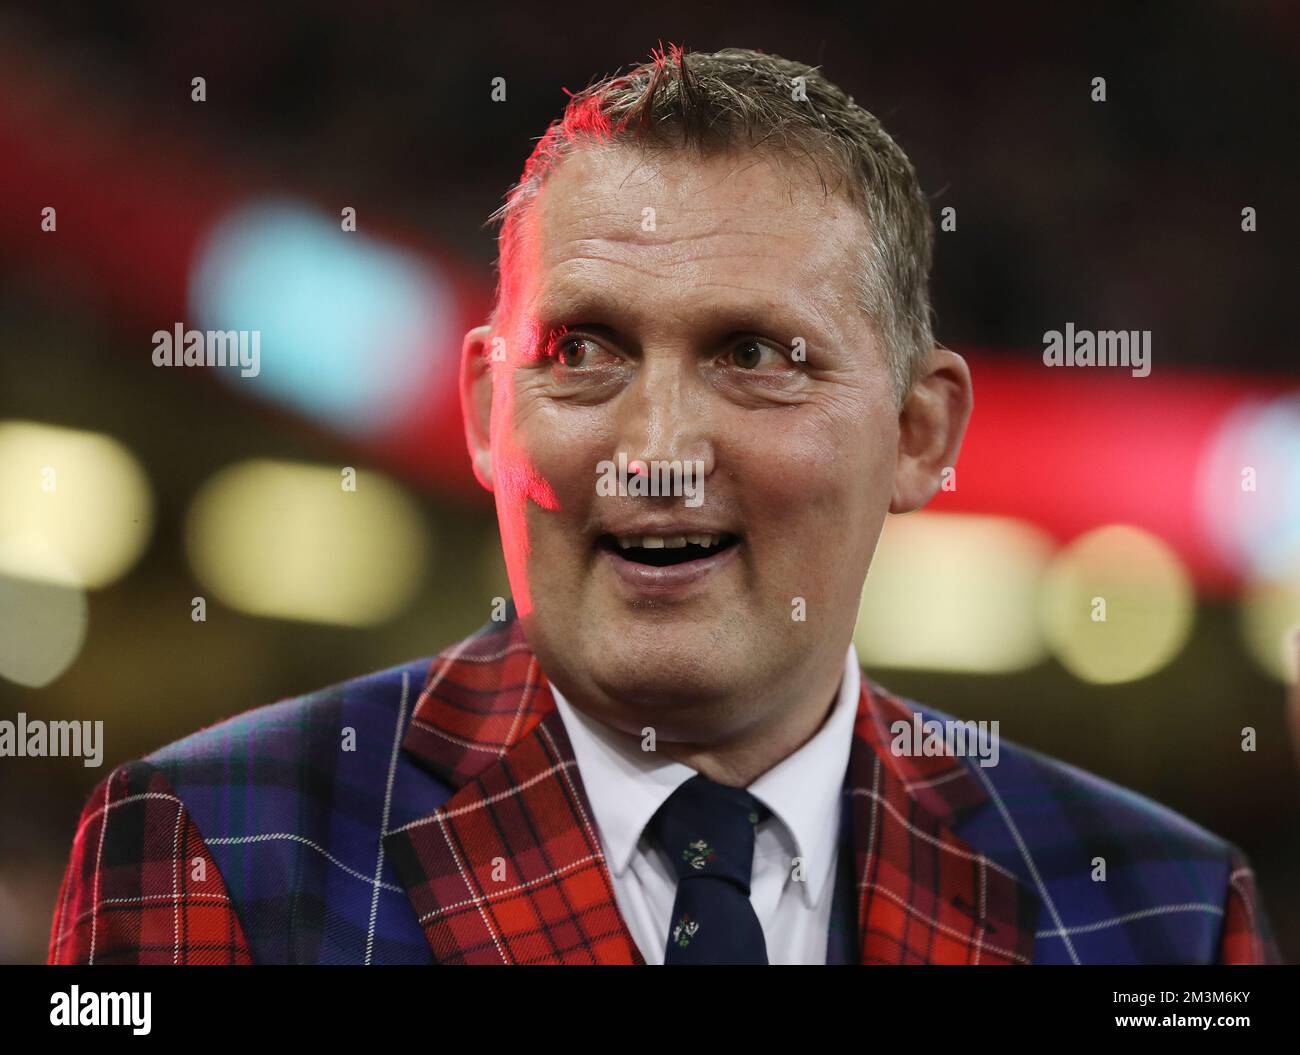 File photo dated 03-11-2018 of Doddie Weir. The 'inspirational' Weir earned 61 caps for Scotland and scored two tries against New Zealand at the 1995 World Cup before with Newcastle he clinched Premiership success three years later. It was in 2017 when Weir's diagnosis with motor neurone disease was revealed and his foundation would go on to raise £8million for MND research. His appearance at Murrayfield for Scotland's Autumn Nations Series fixture with New Zealand proved his final public outing before his death at the age of 52. Issue date: Friday December 16, 2022. Stock Photo